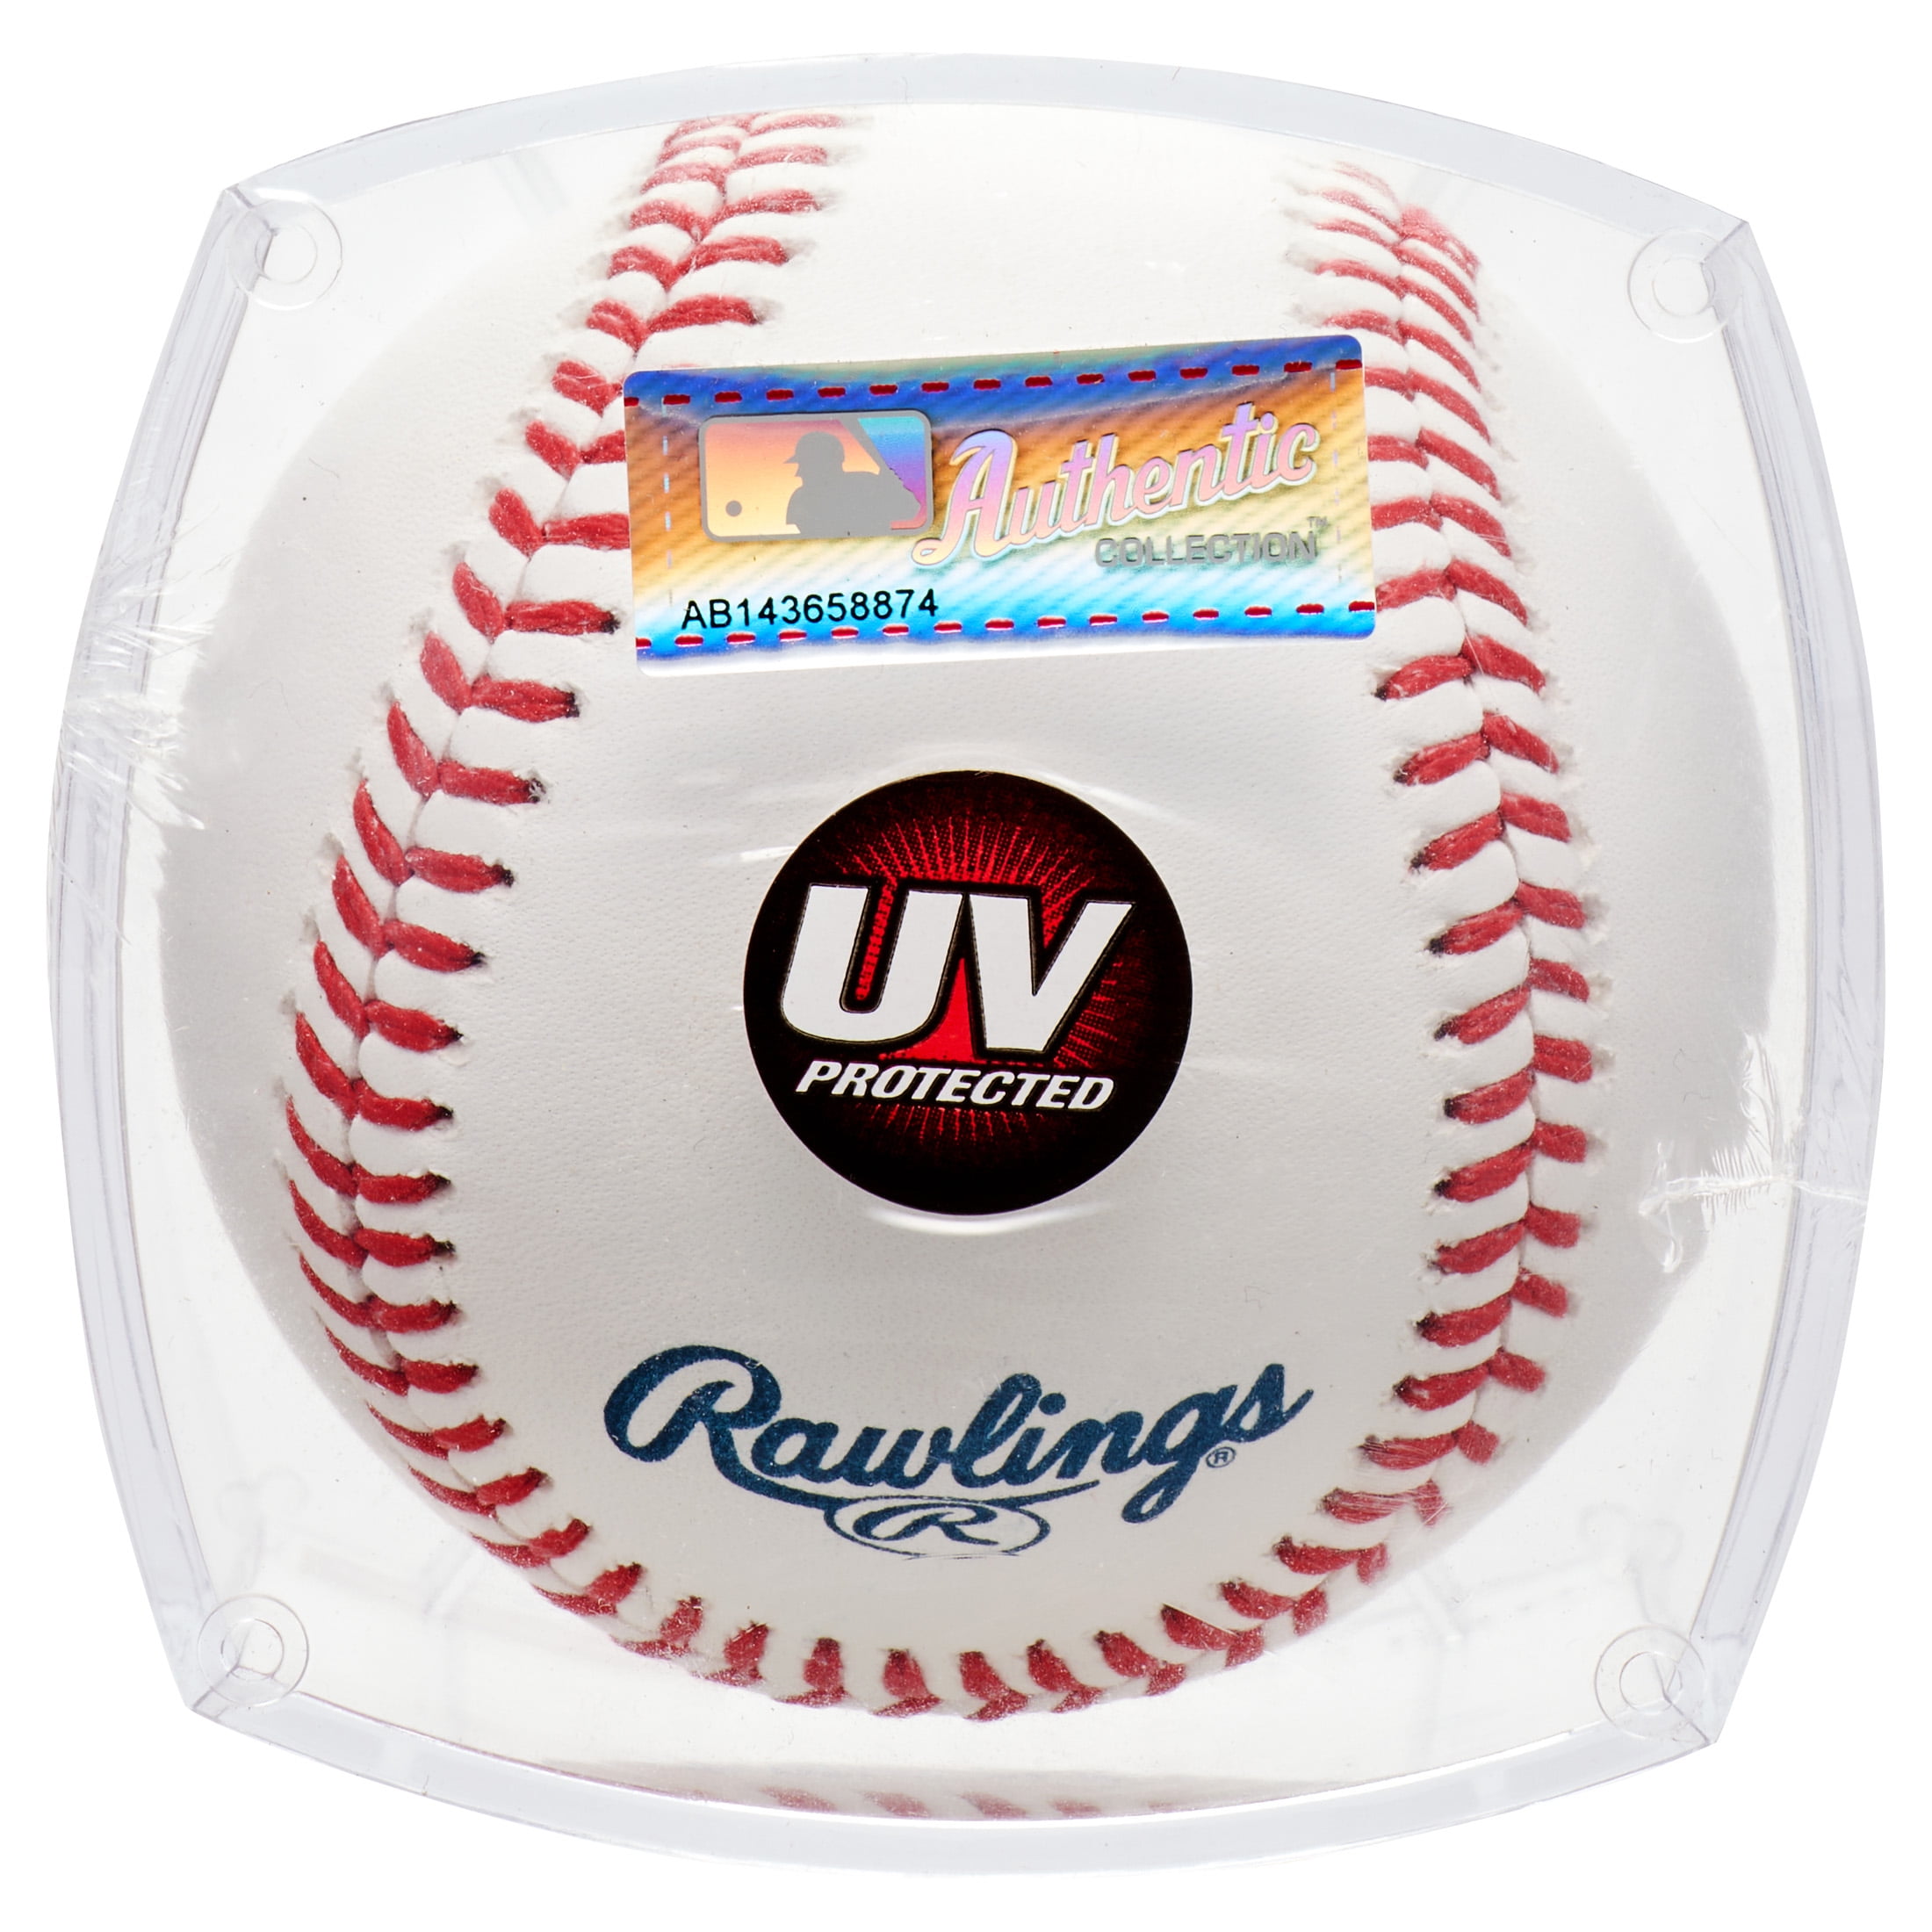 Rawlings Ball of Fame Baseball Display Cube Collectible Balls Clear RBOF 